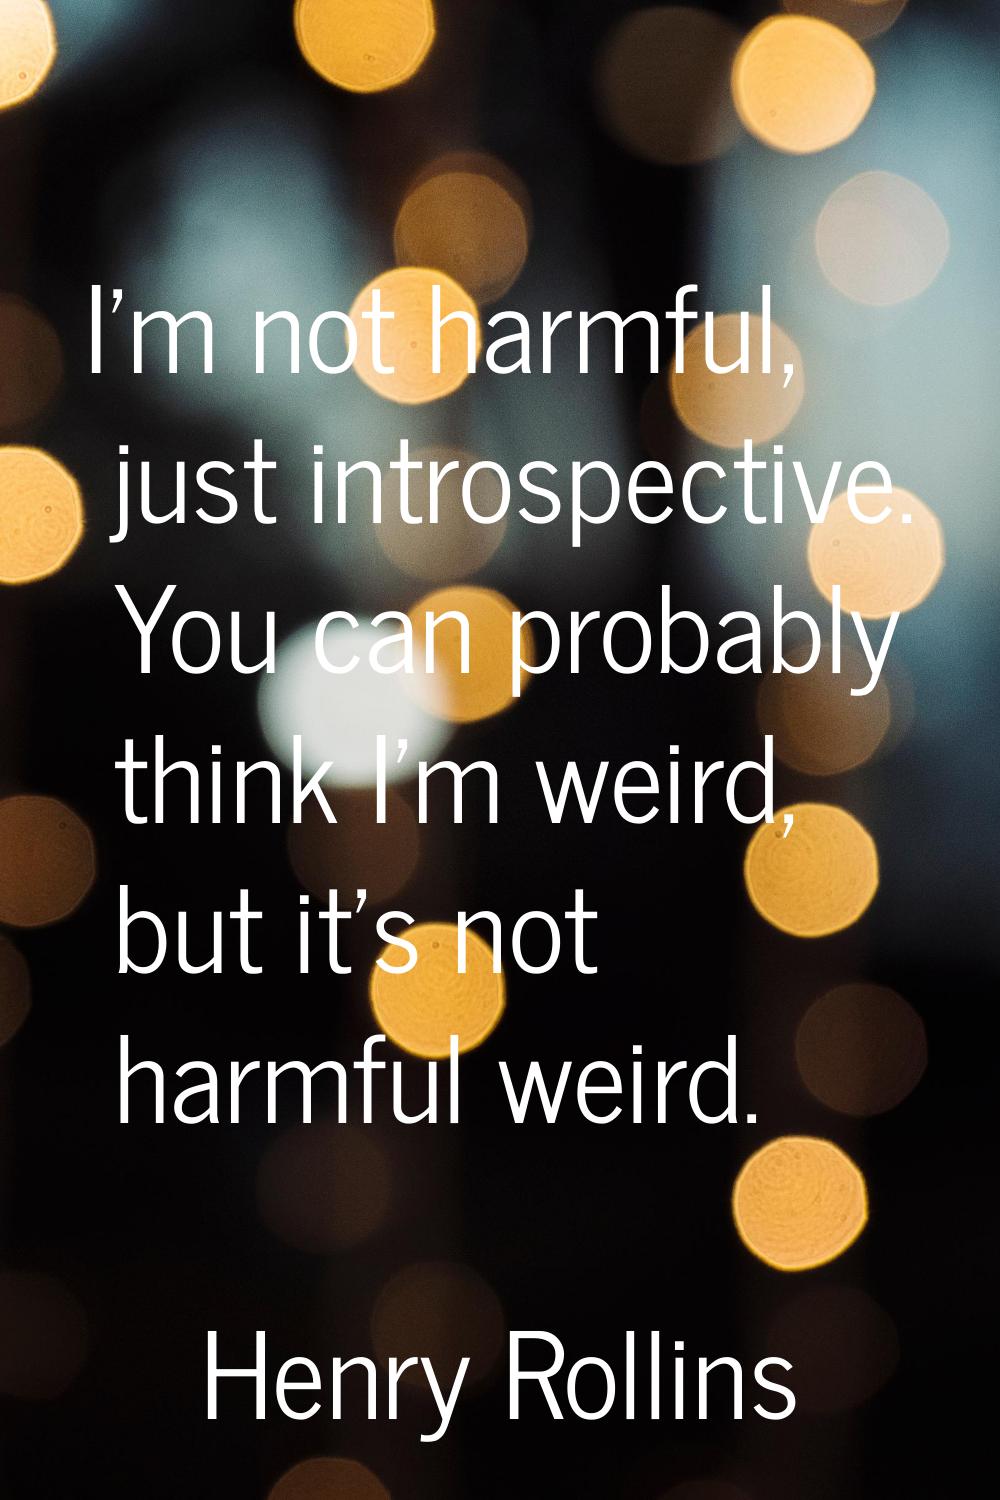 I'm not harmful, just introspective. You can probably think I'm weird, but it's not harmful weird.